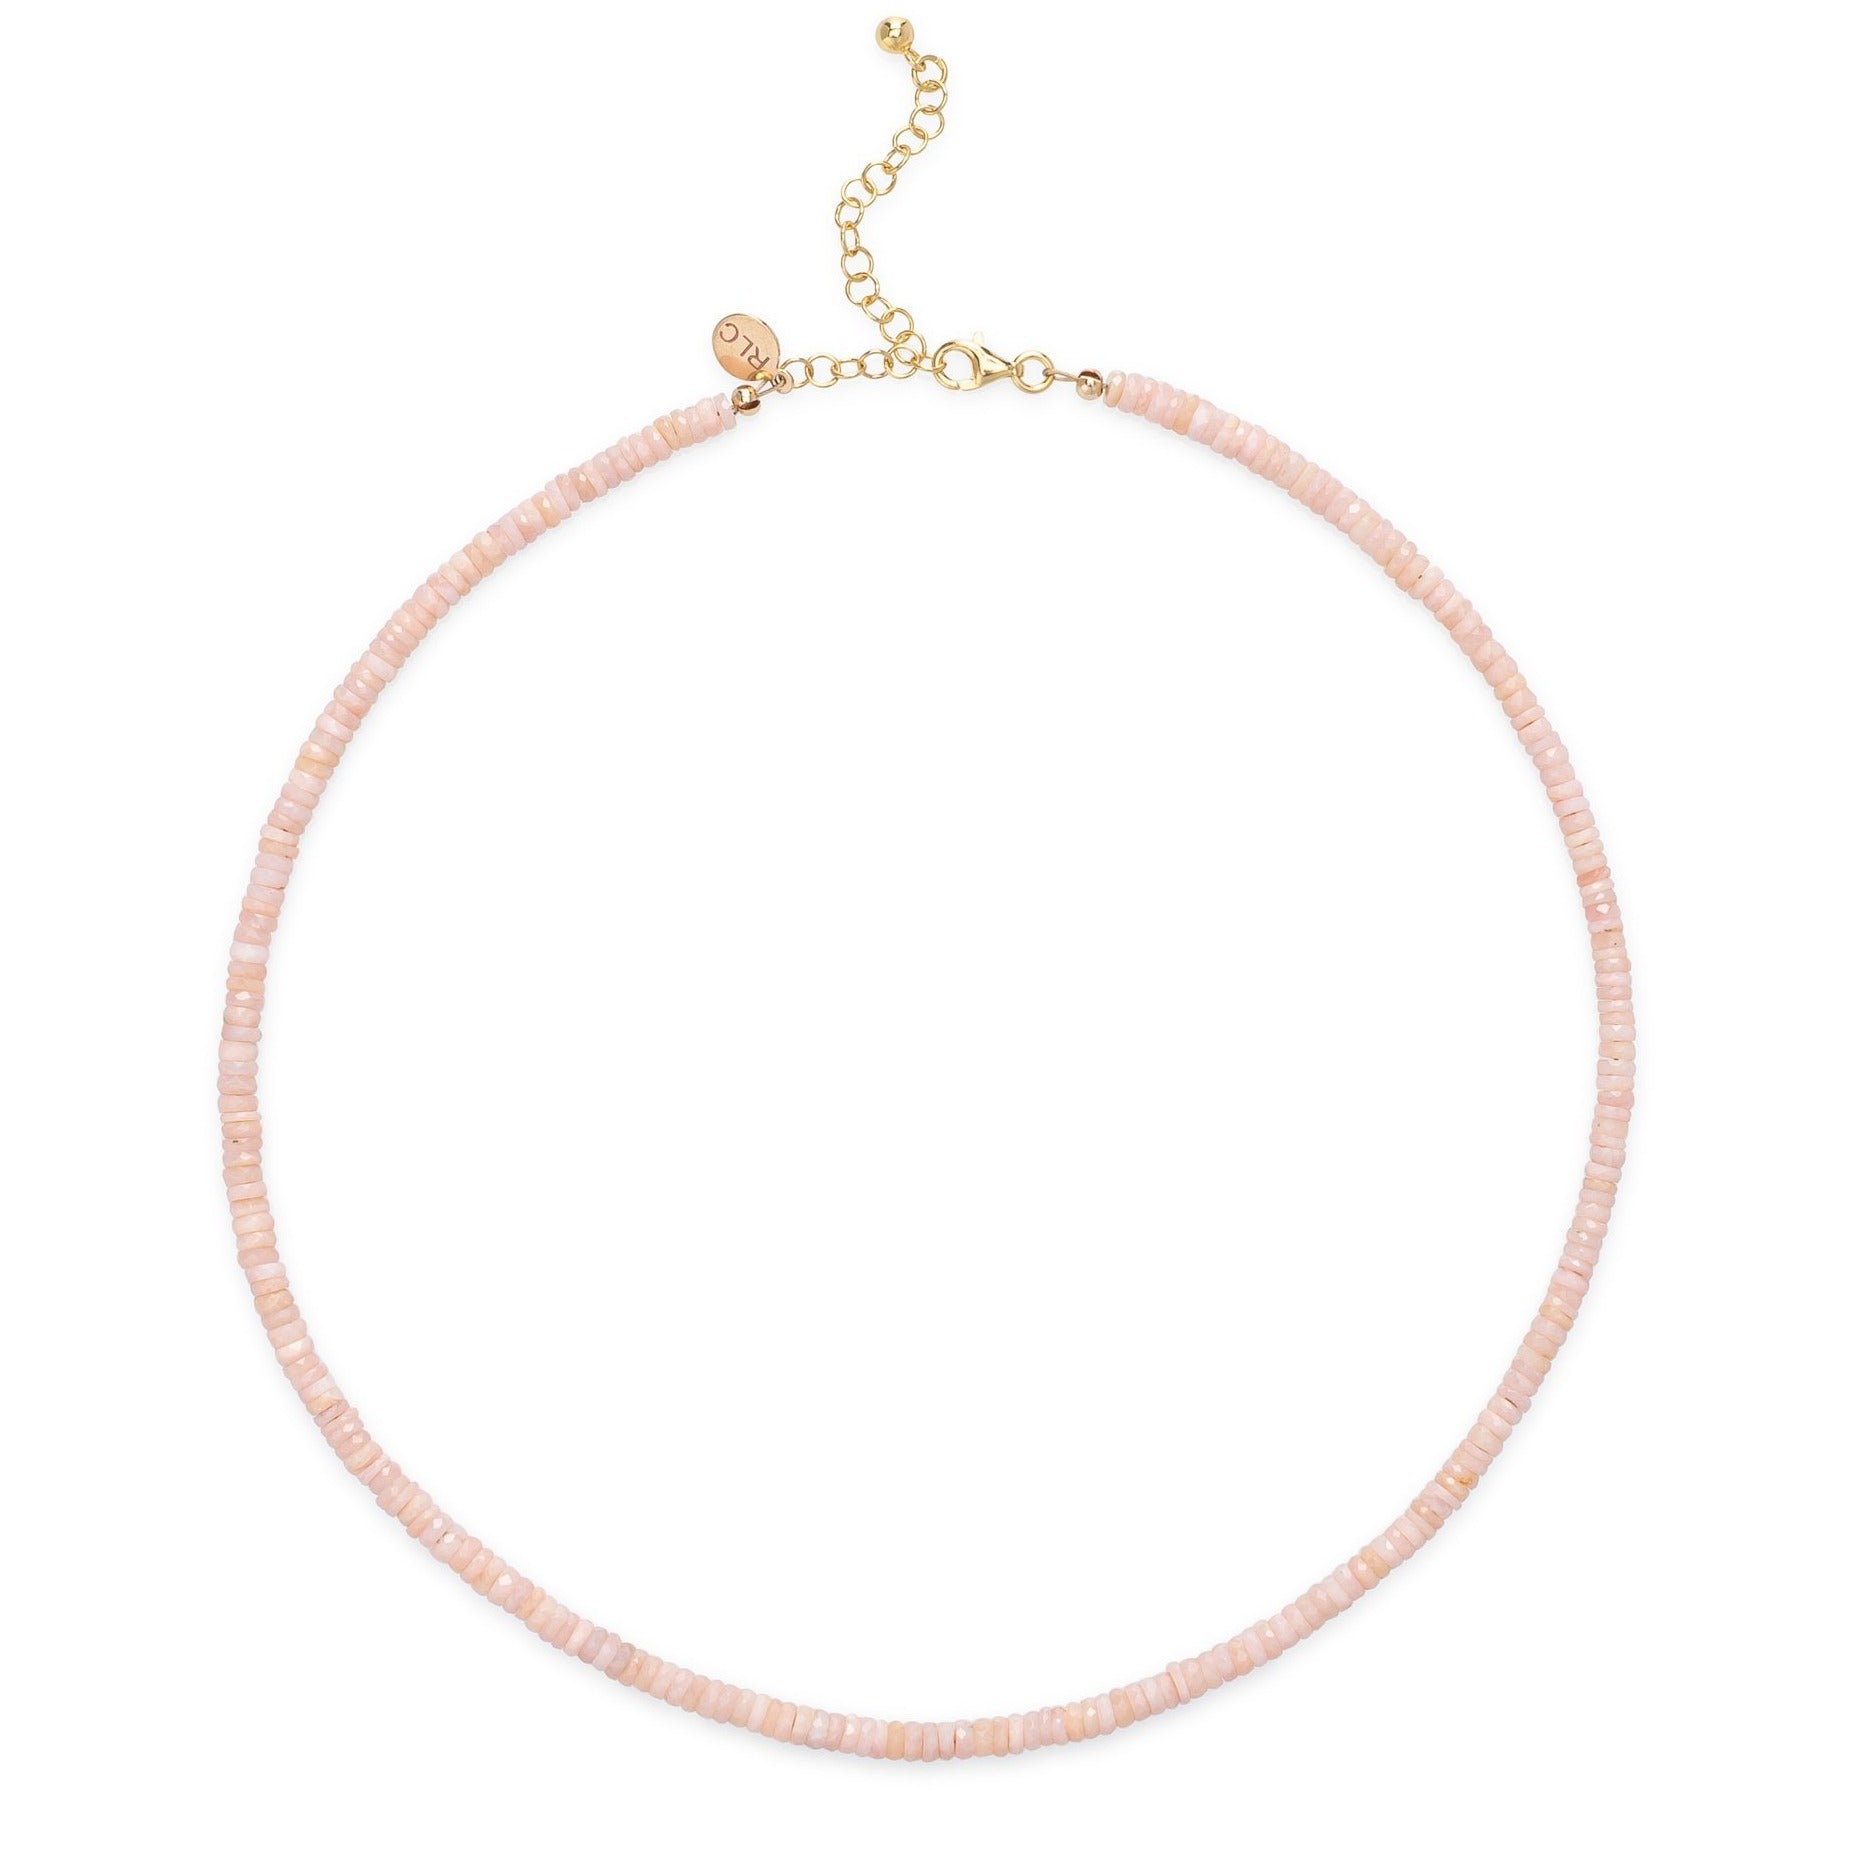 Pink Opal Beaded Necklace